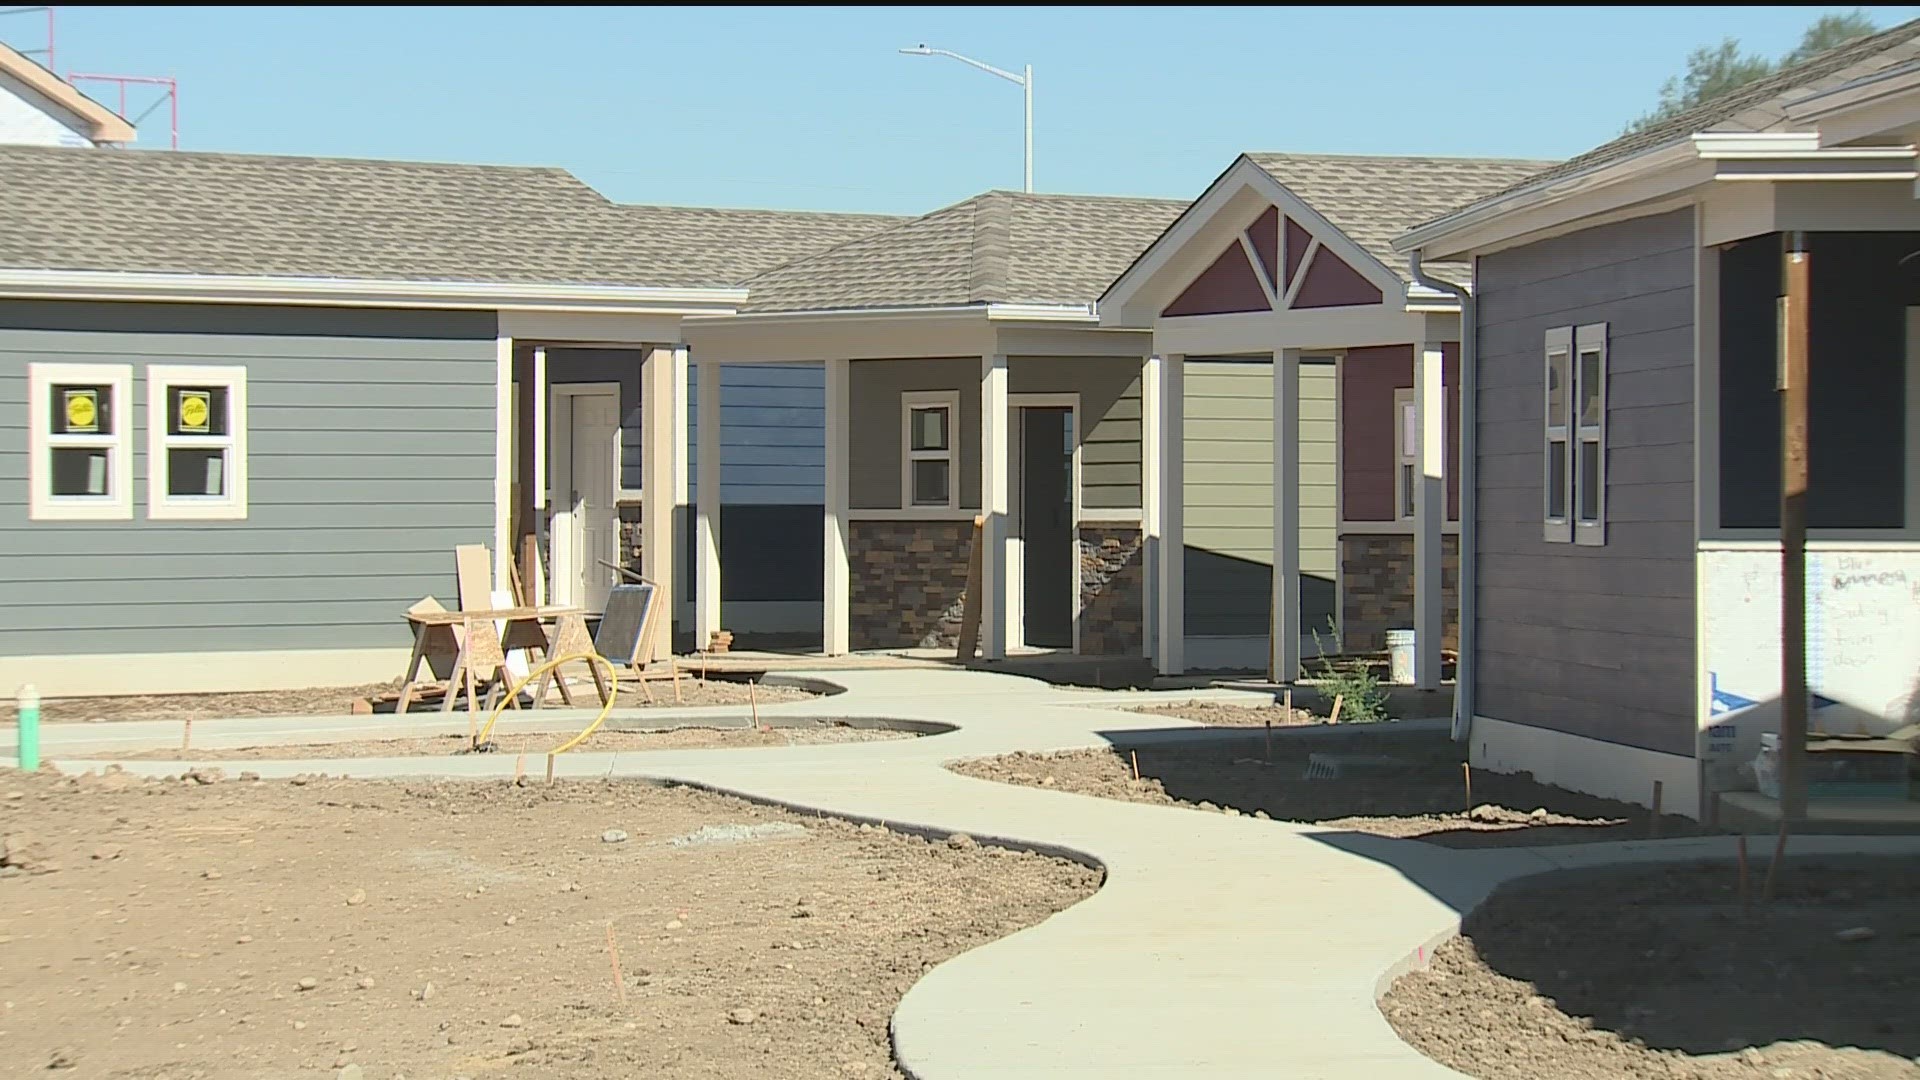 Veterans Community Project is asking for the community's help to raise $650,000 in order to finish 26 tiny homes.